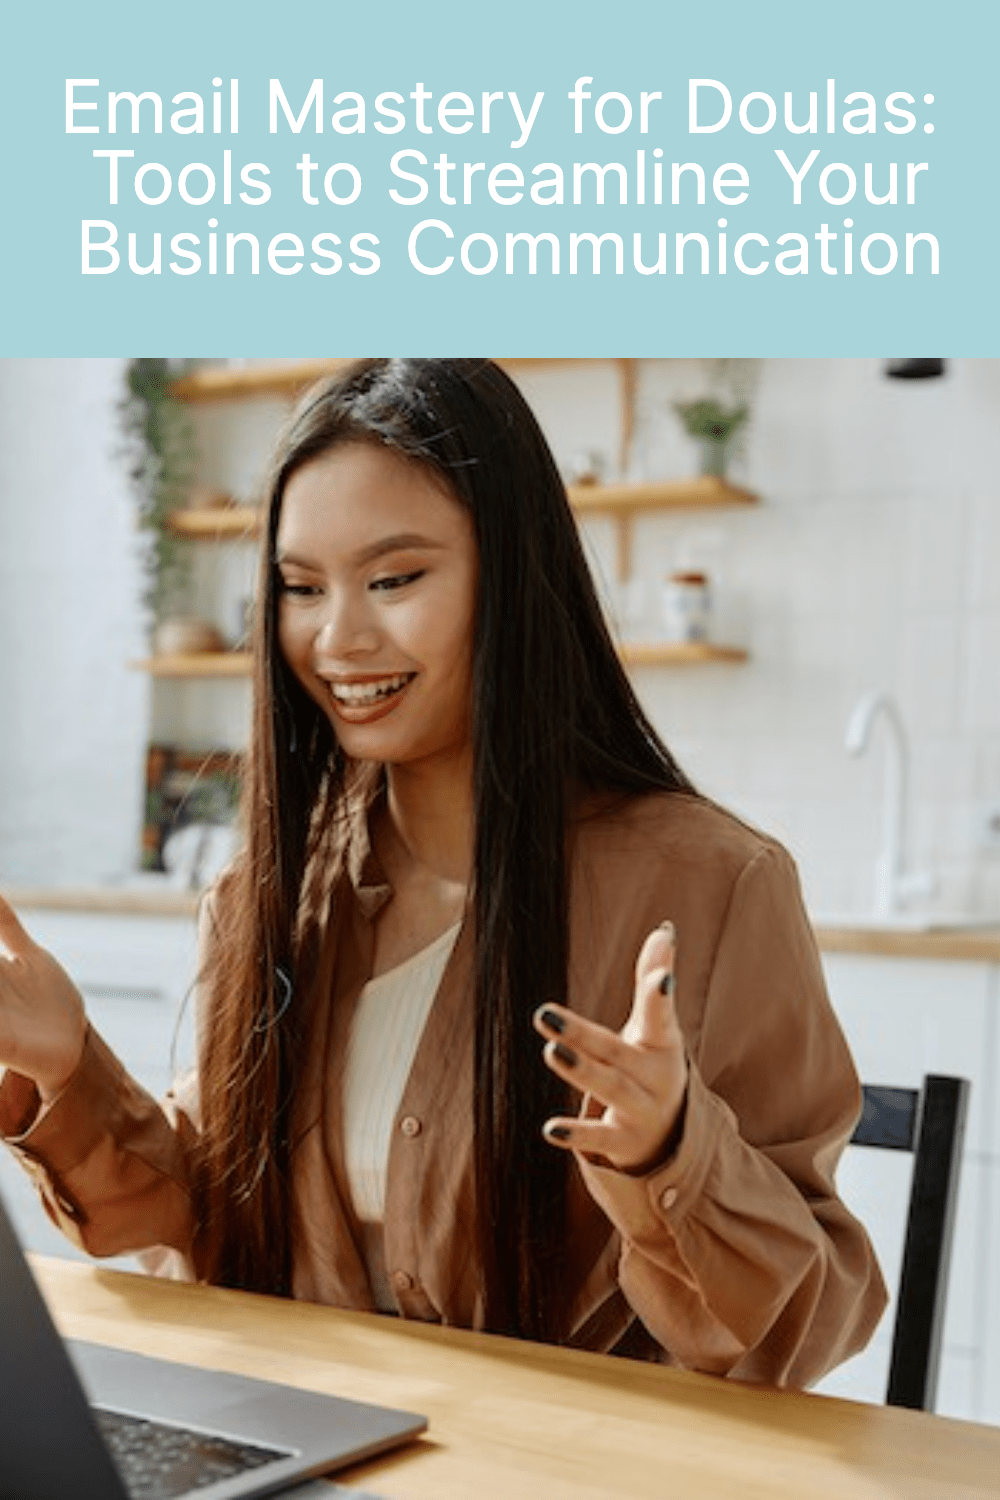 Email Mastery for Doulas: Streamline Business Communication.